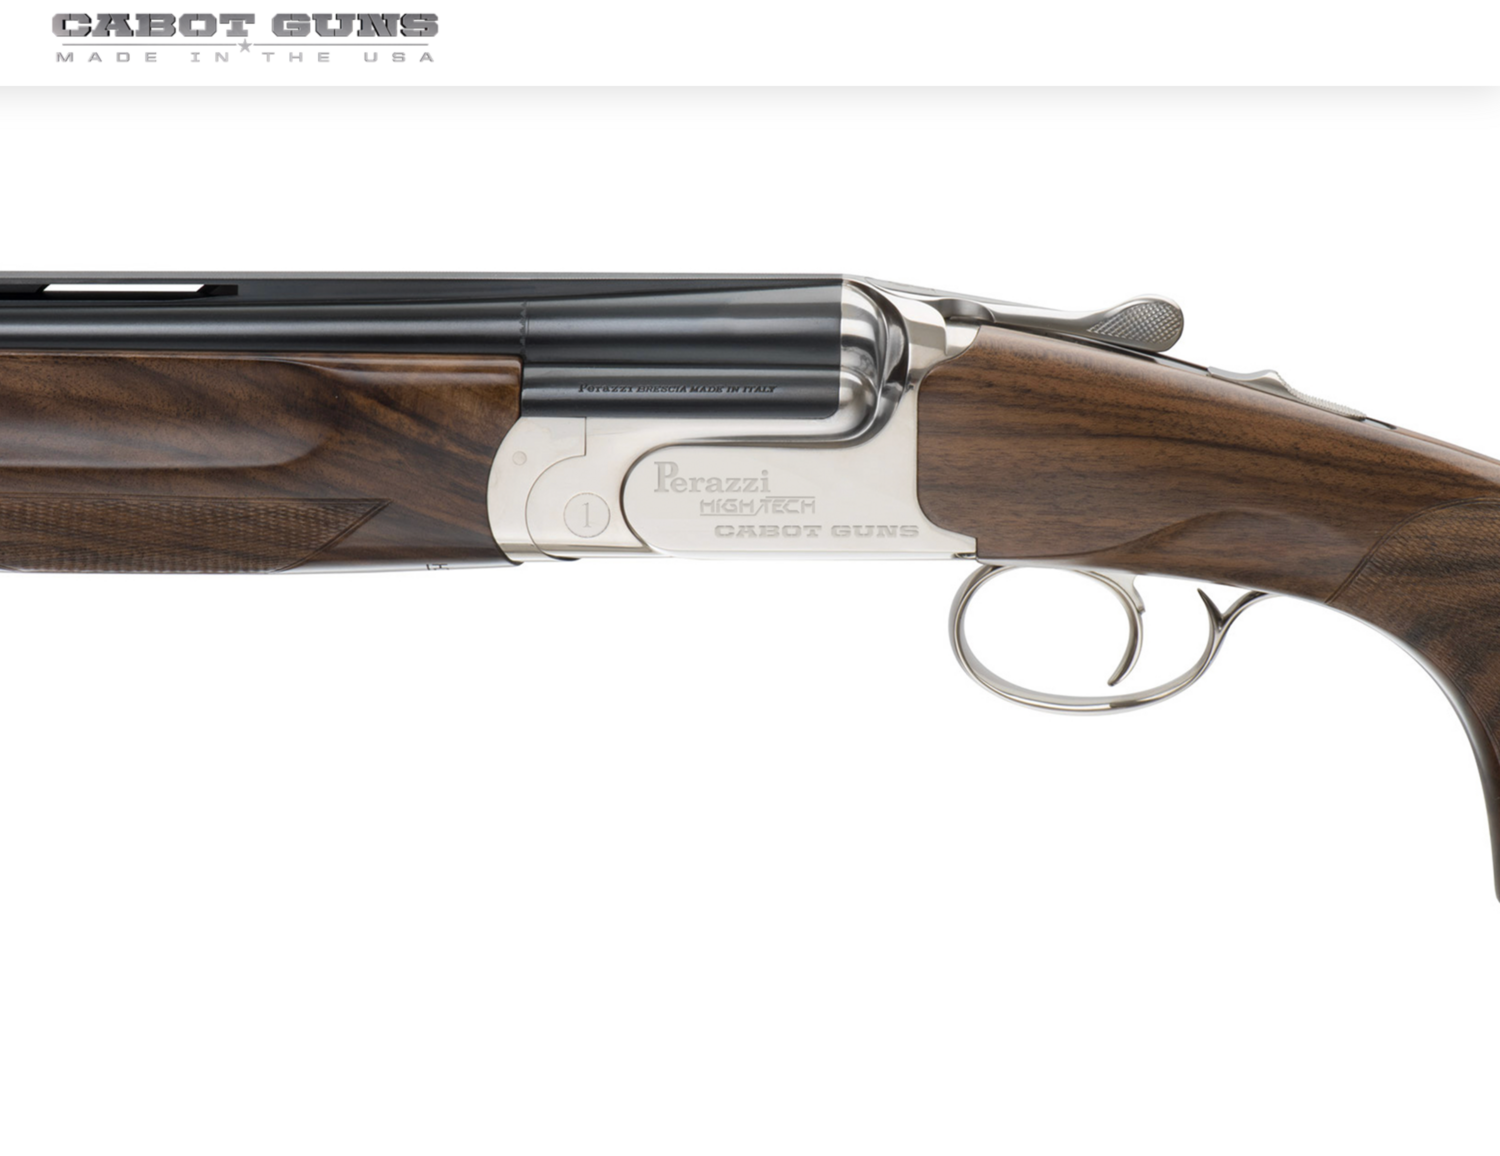 CABOT 2022 LIMITED EDTION OF THE MONTH, NOVEMBER CABOT PERAZZI HiTECH, THE SHOTGUN.